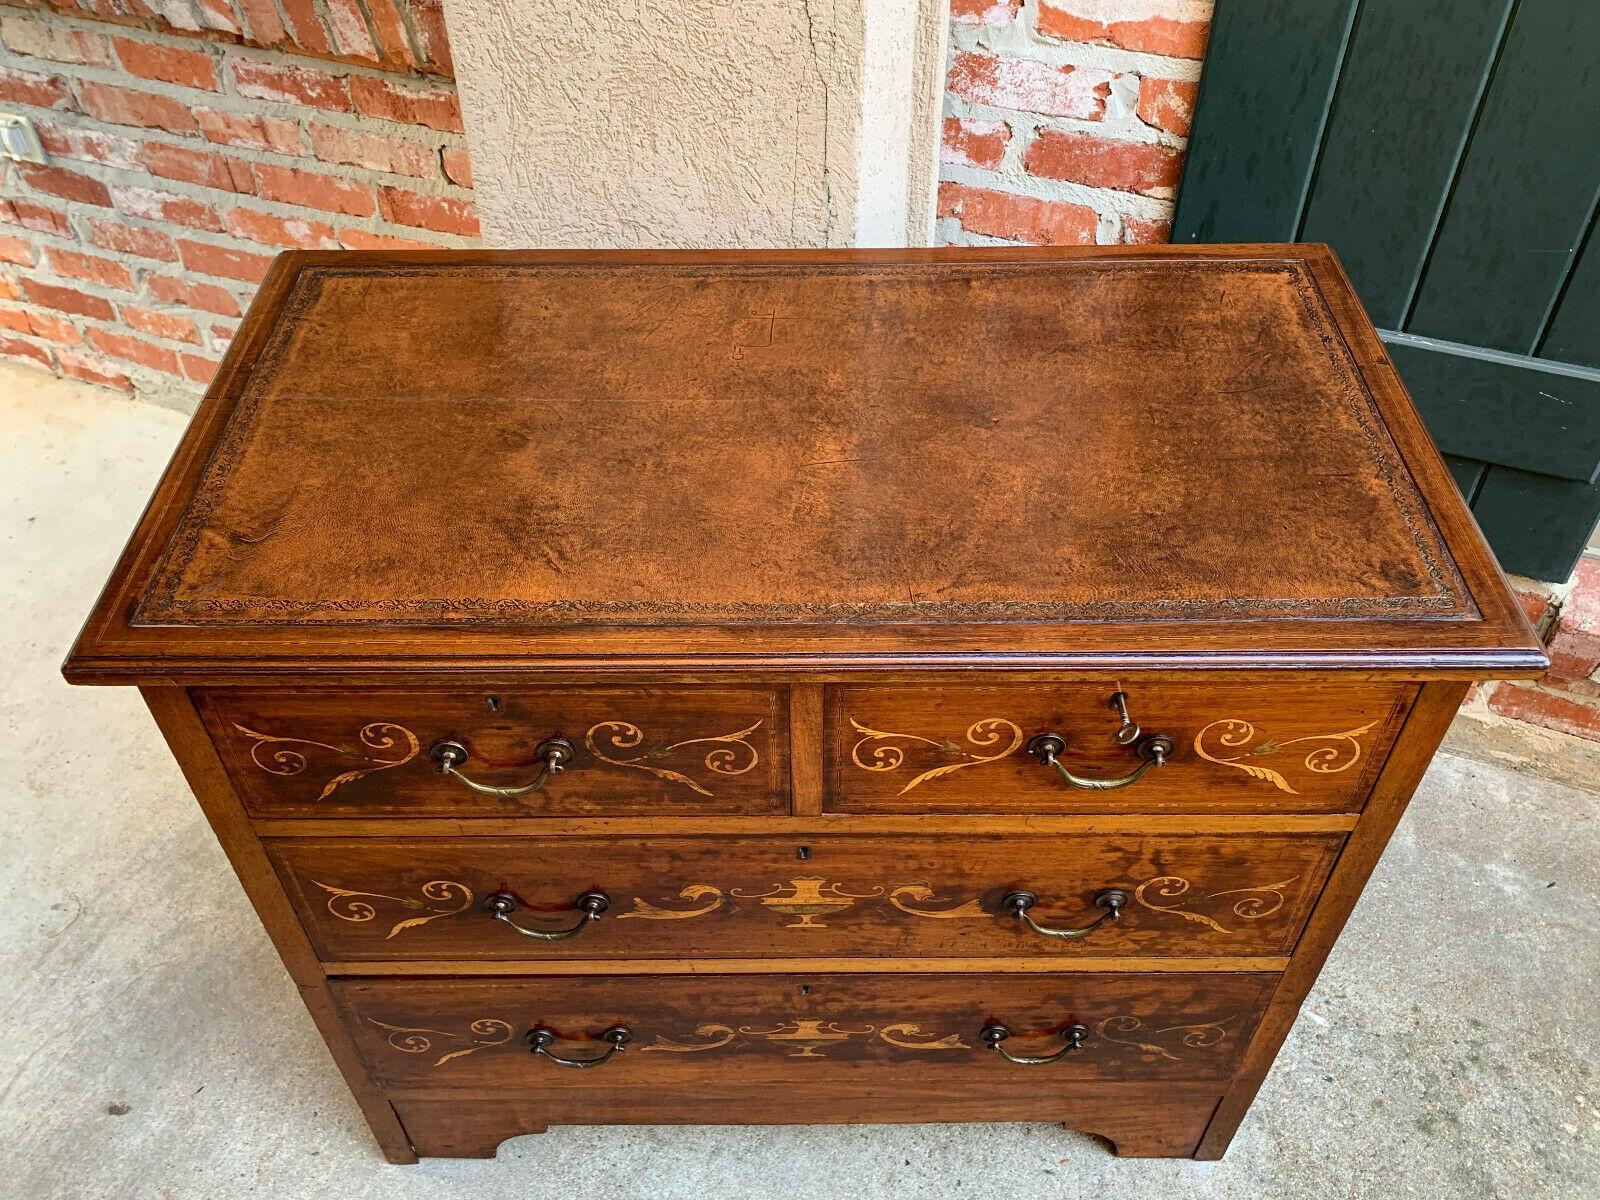 British 19th century English Inlaid Oak Chest of Drawers Cabinet Leather Table Georgian 